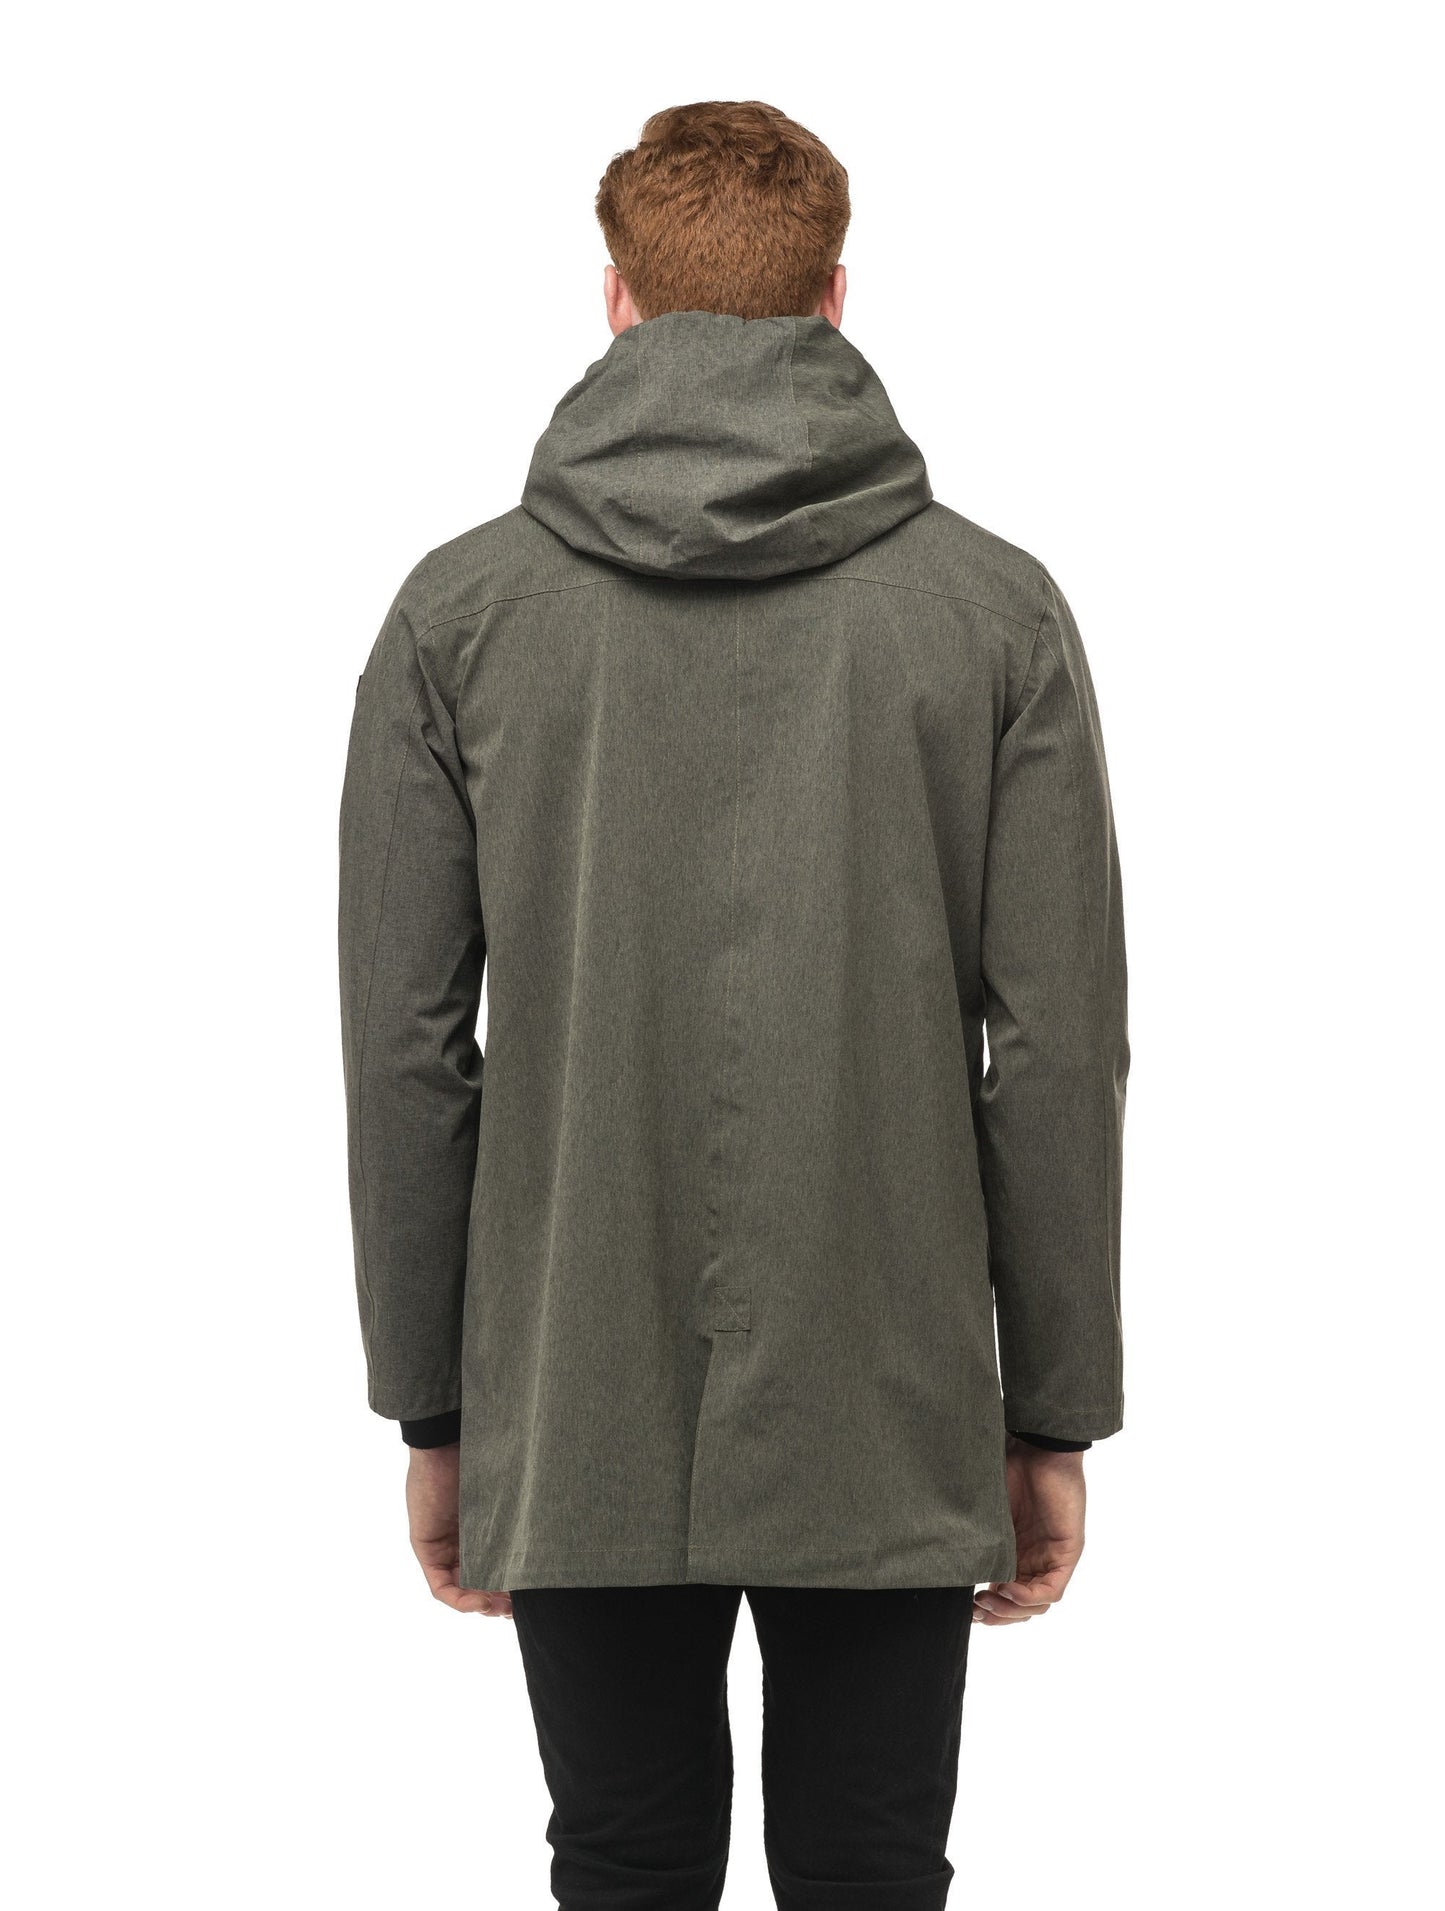 Men's thigh length rain coat with hood in Army Green